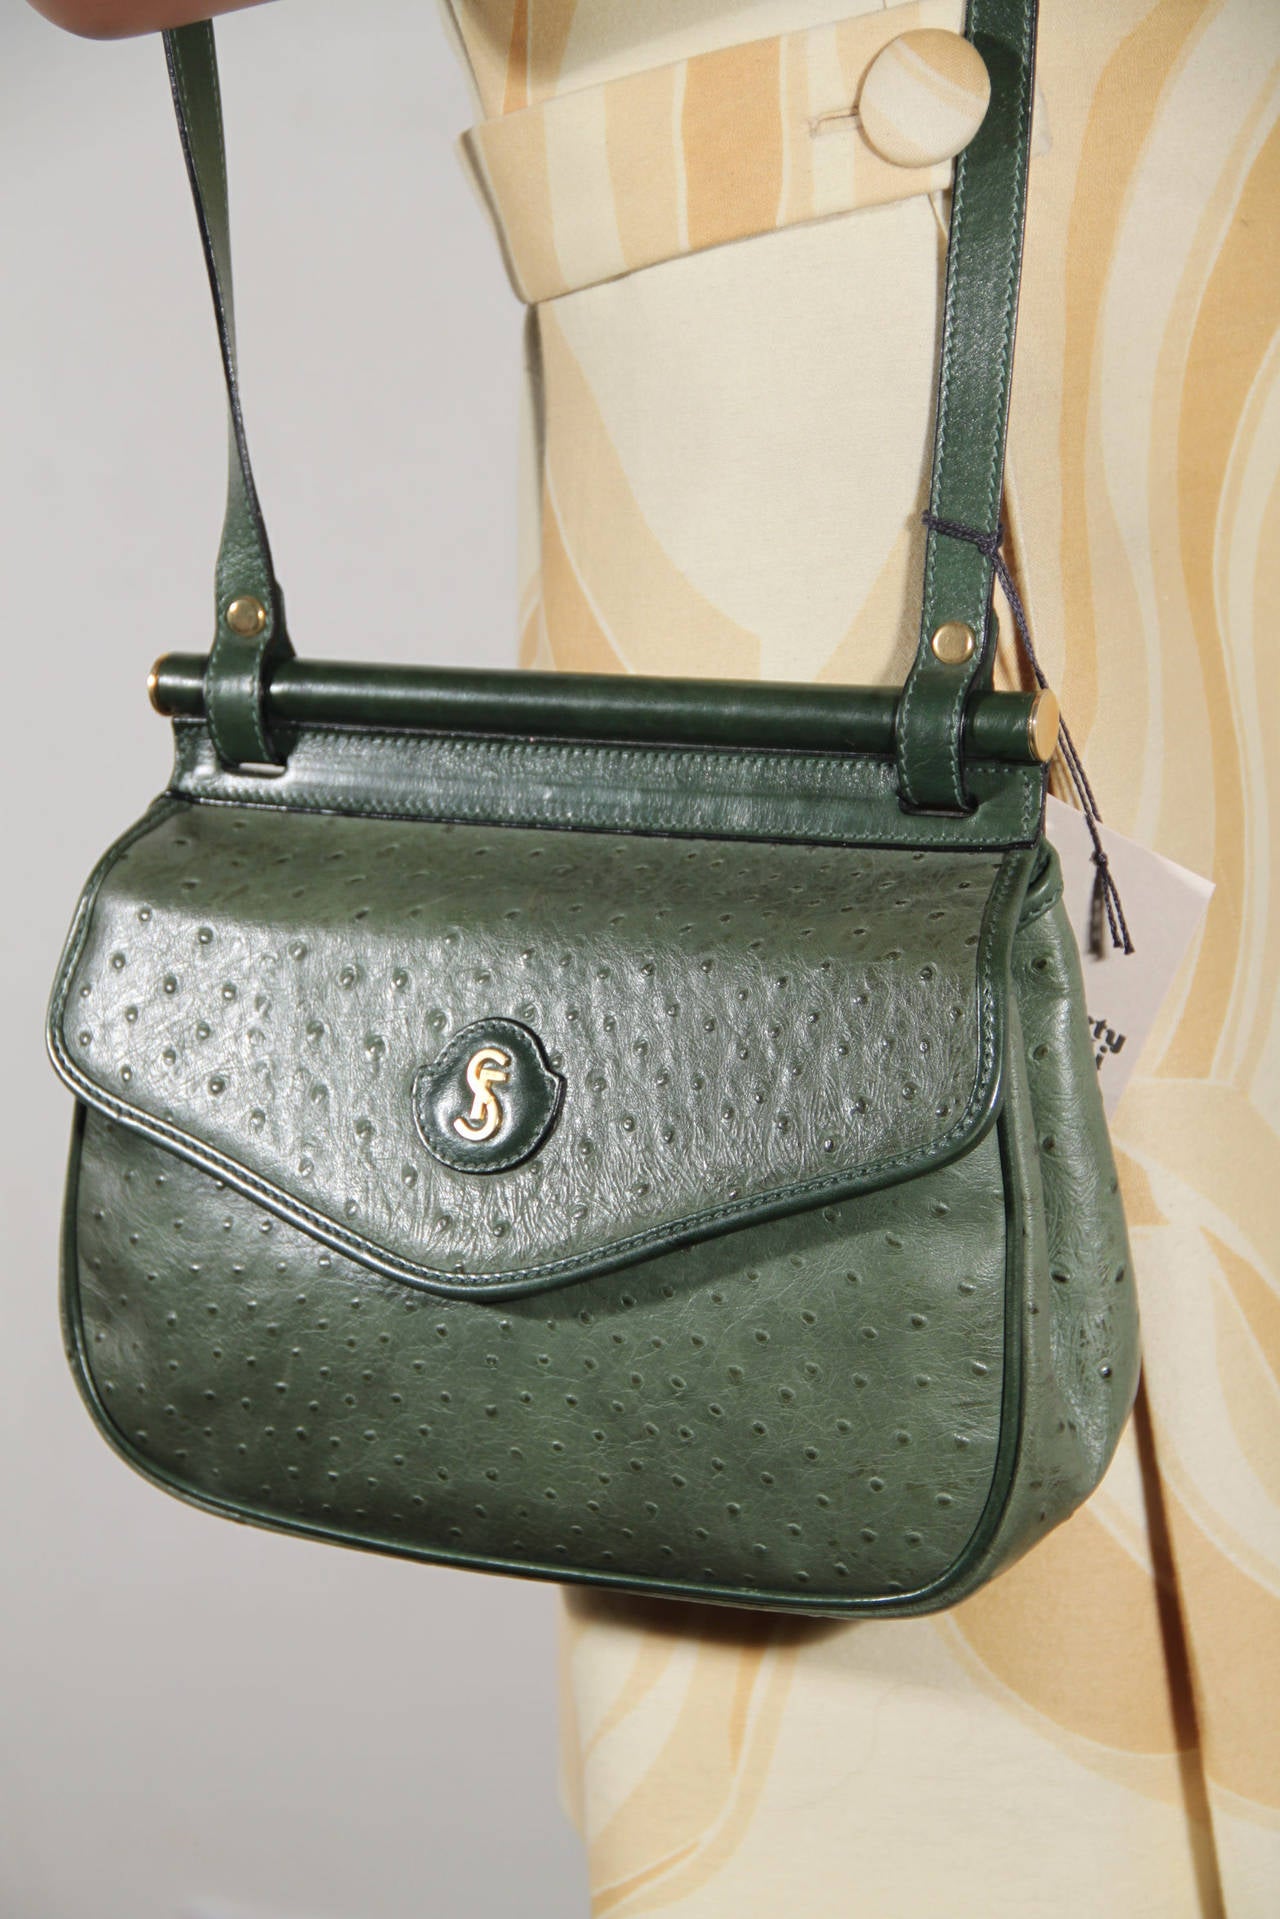 SORELLE FONTANA Vintage Green OSTRICH SKIN Leather SHOULDER BAG In Excellent Condition In Rome, Rome